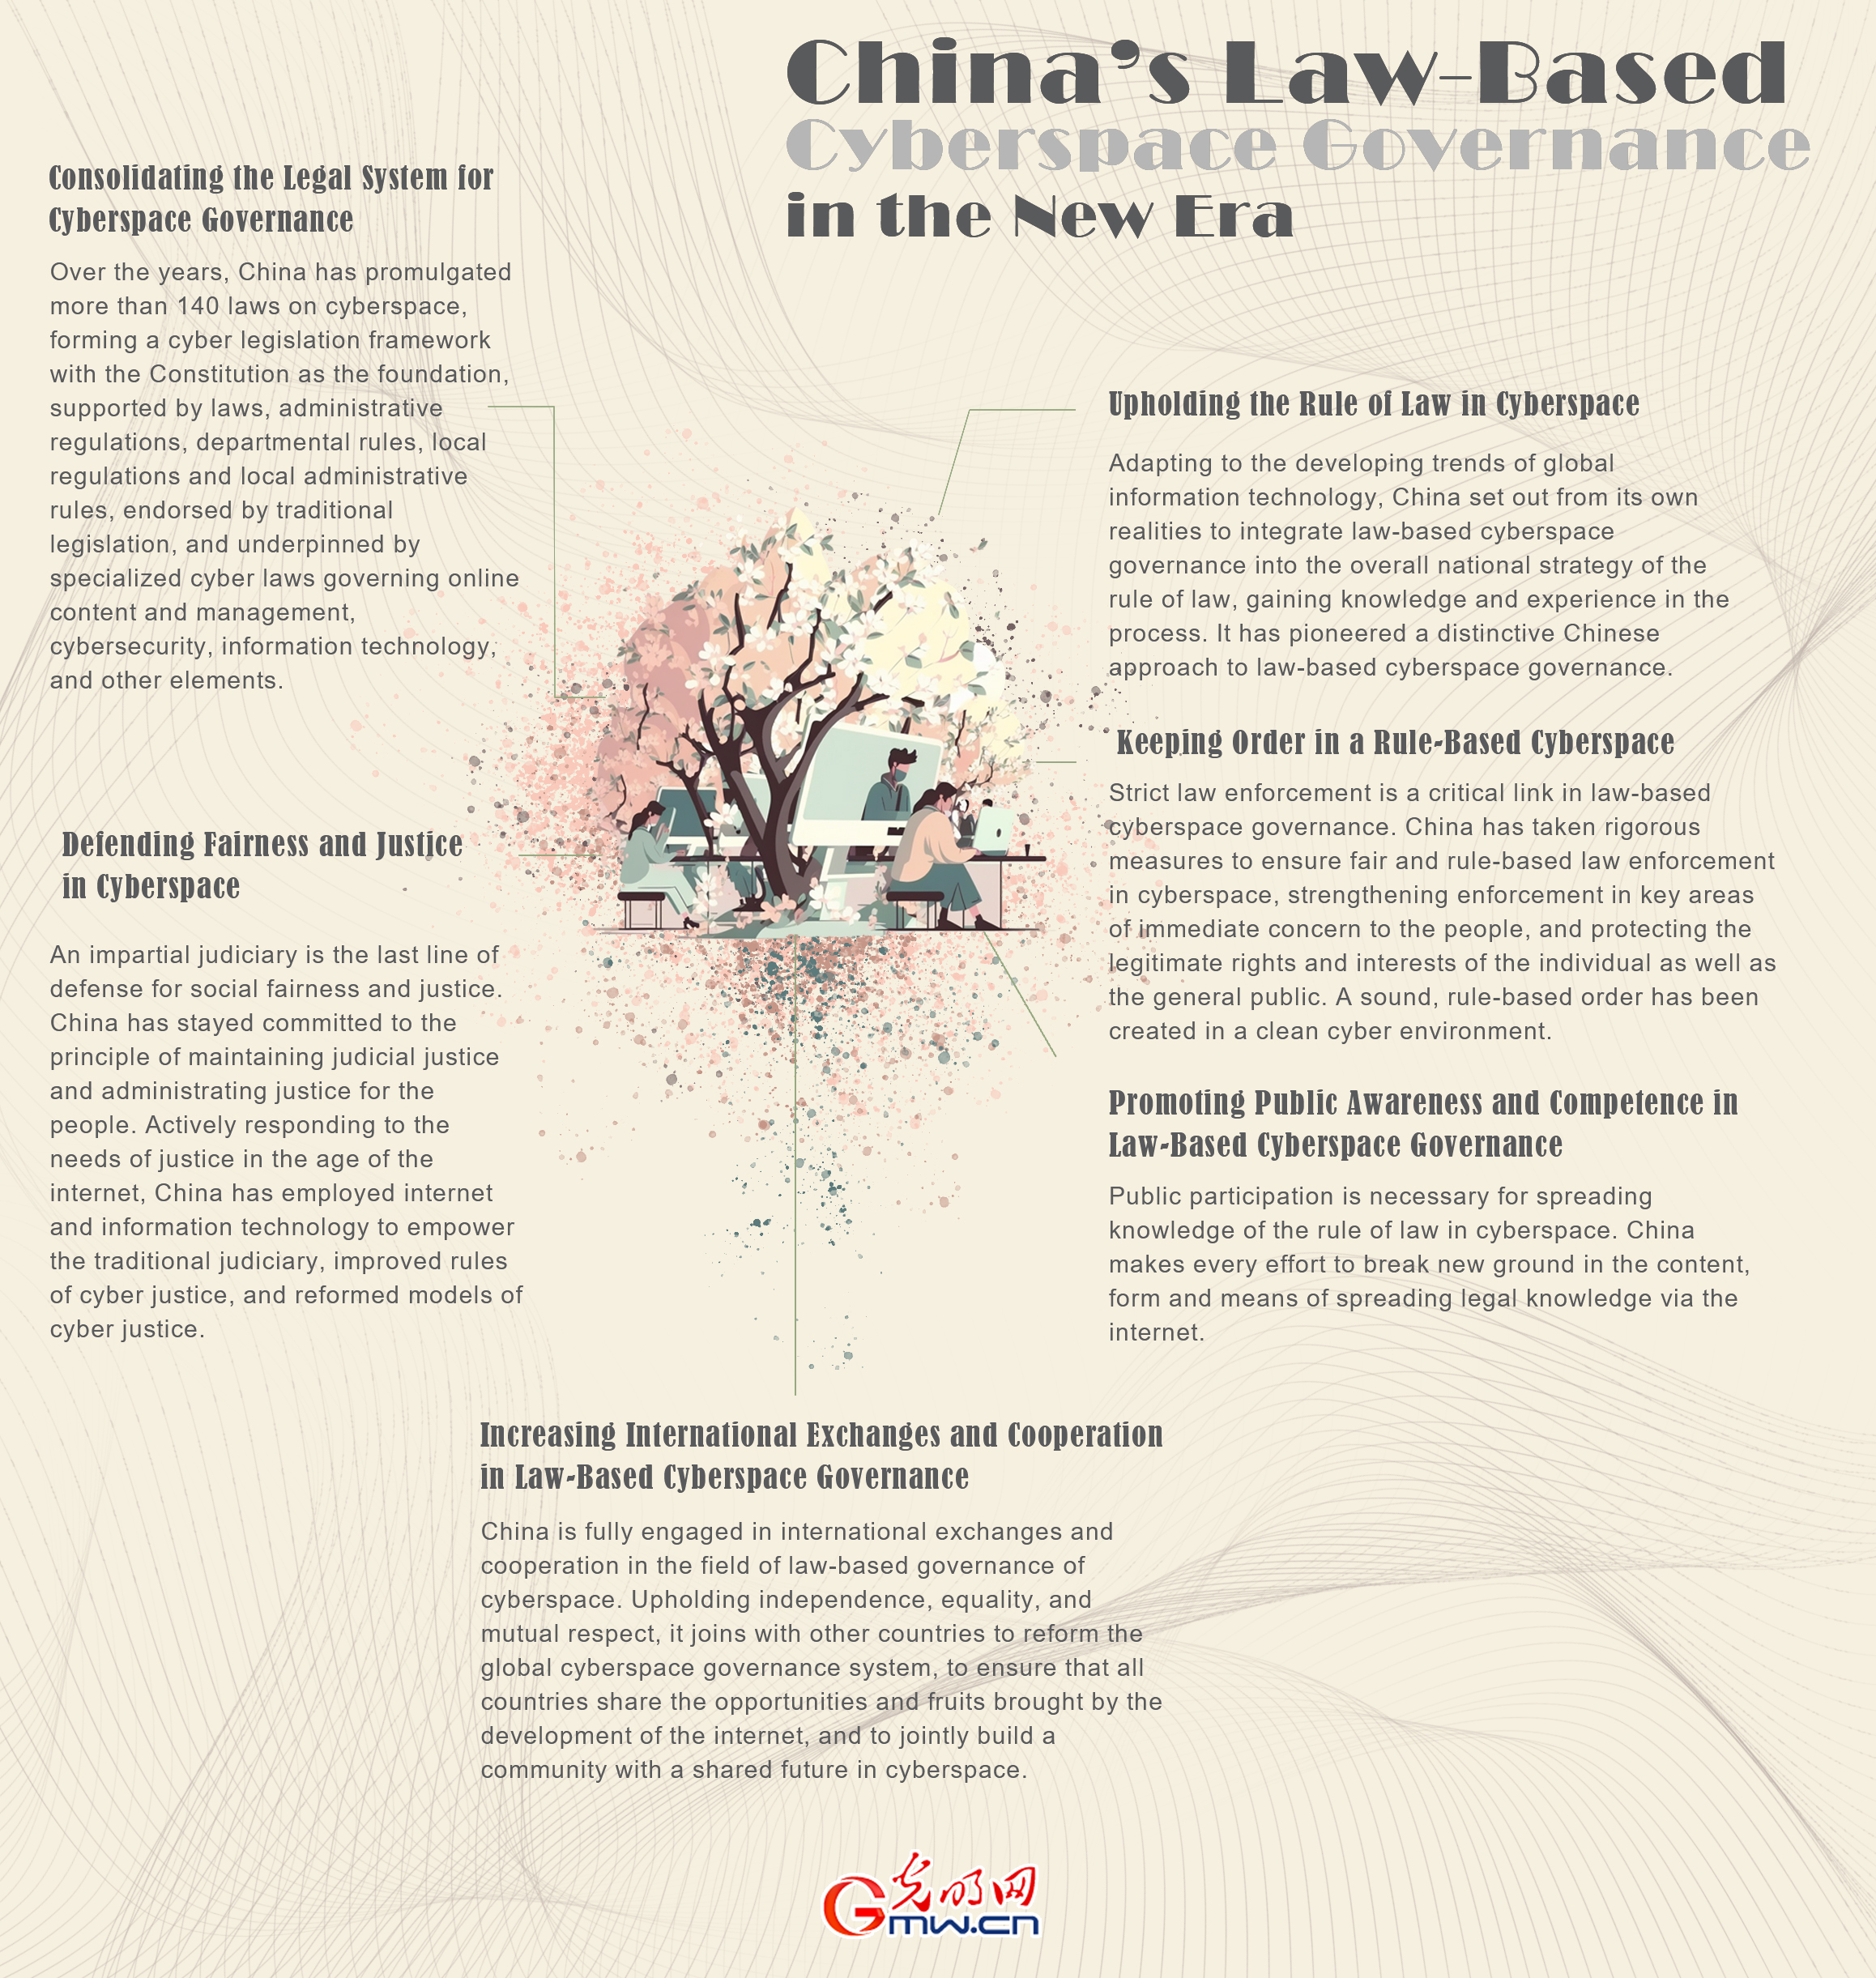 Highlights of China’s Law-Based Cyberspace Governance in the New Era